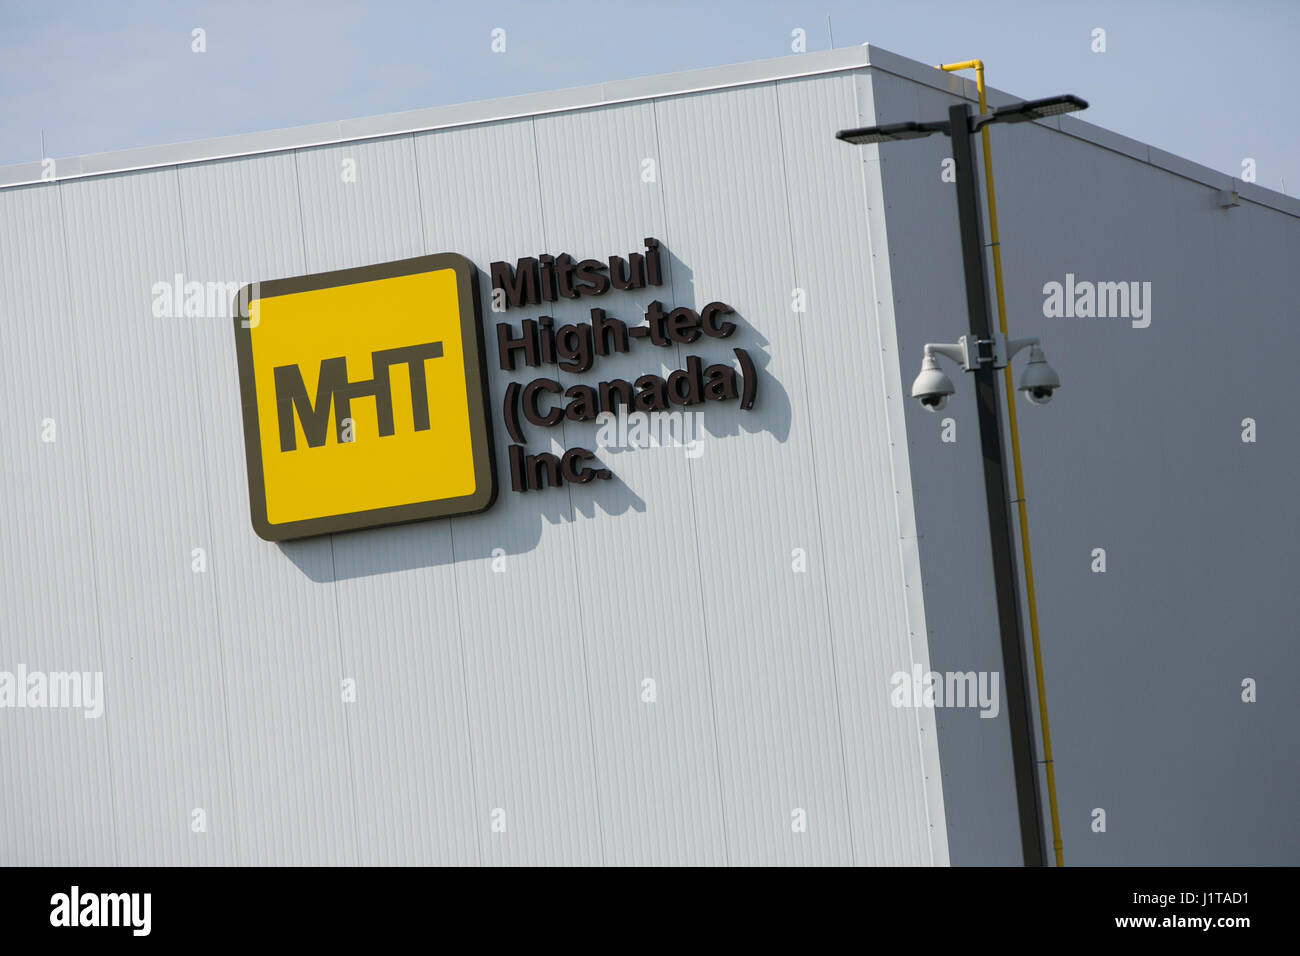 A logo sign outside of a facility occupied by Mitsui High-tec, Inc., in Brantford, Ontario, Canada, on April 15, 2017. Stock Photo